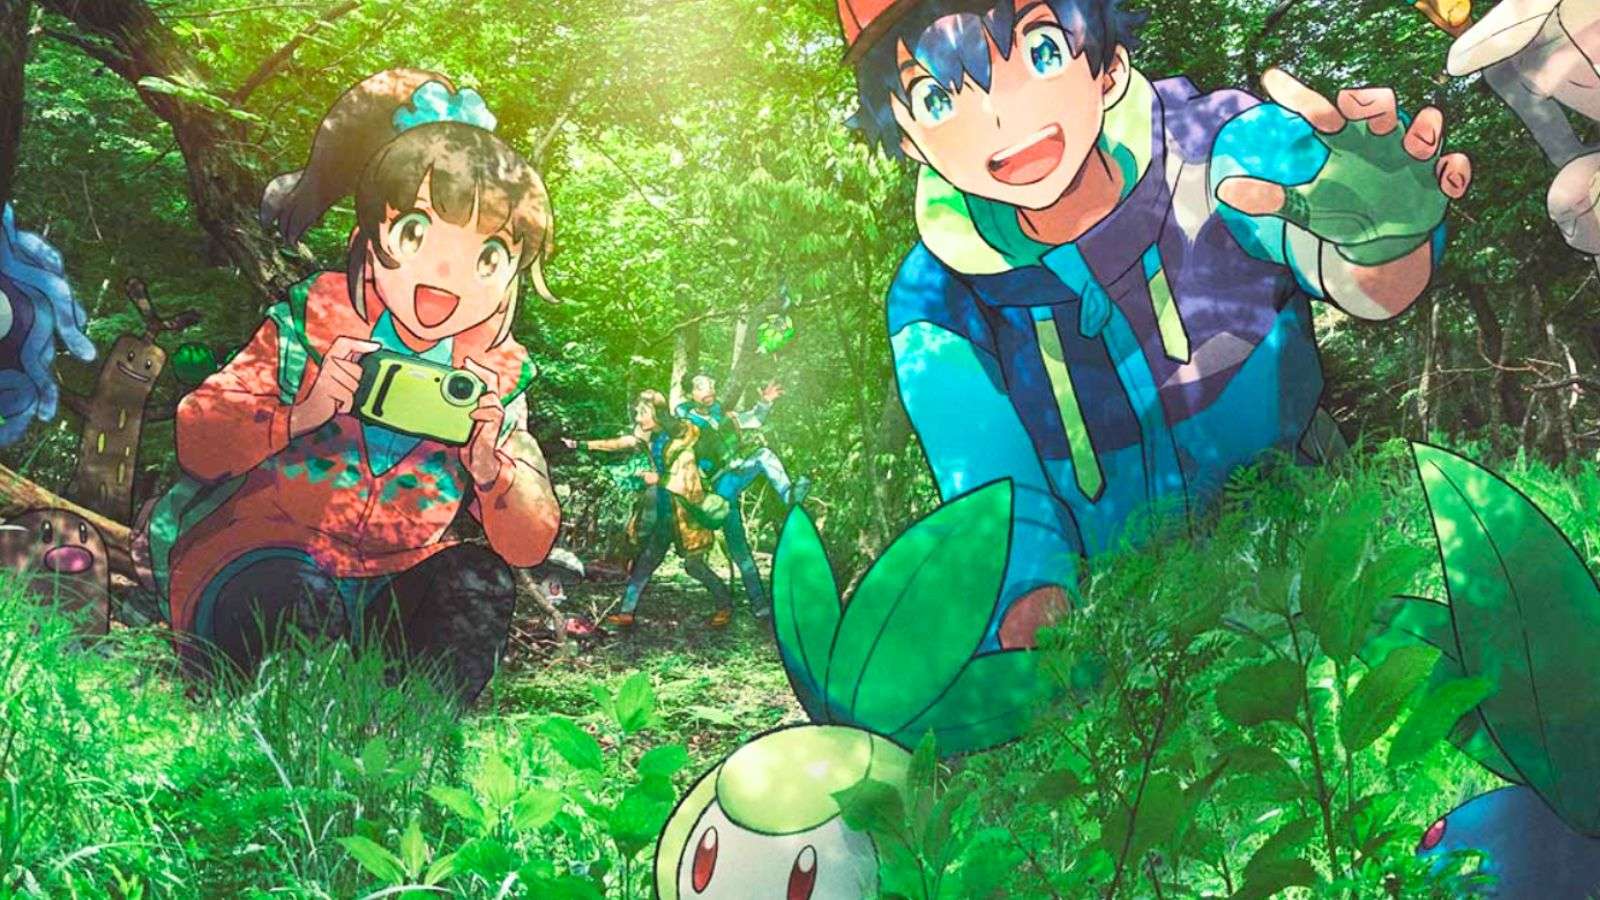 A promotional image on Pokemon Wonder set in the same region PokePark Kanto in Tokyo, Japan will open. It shows two trainers in a verdant forest looking at a Pokemon